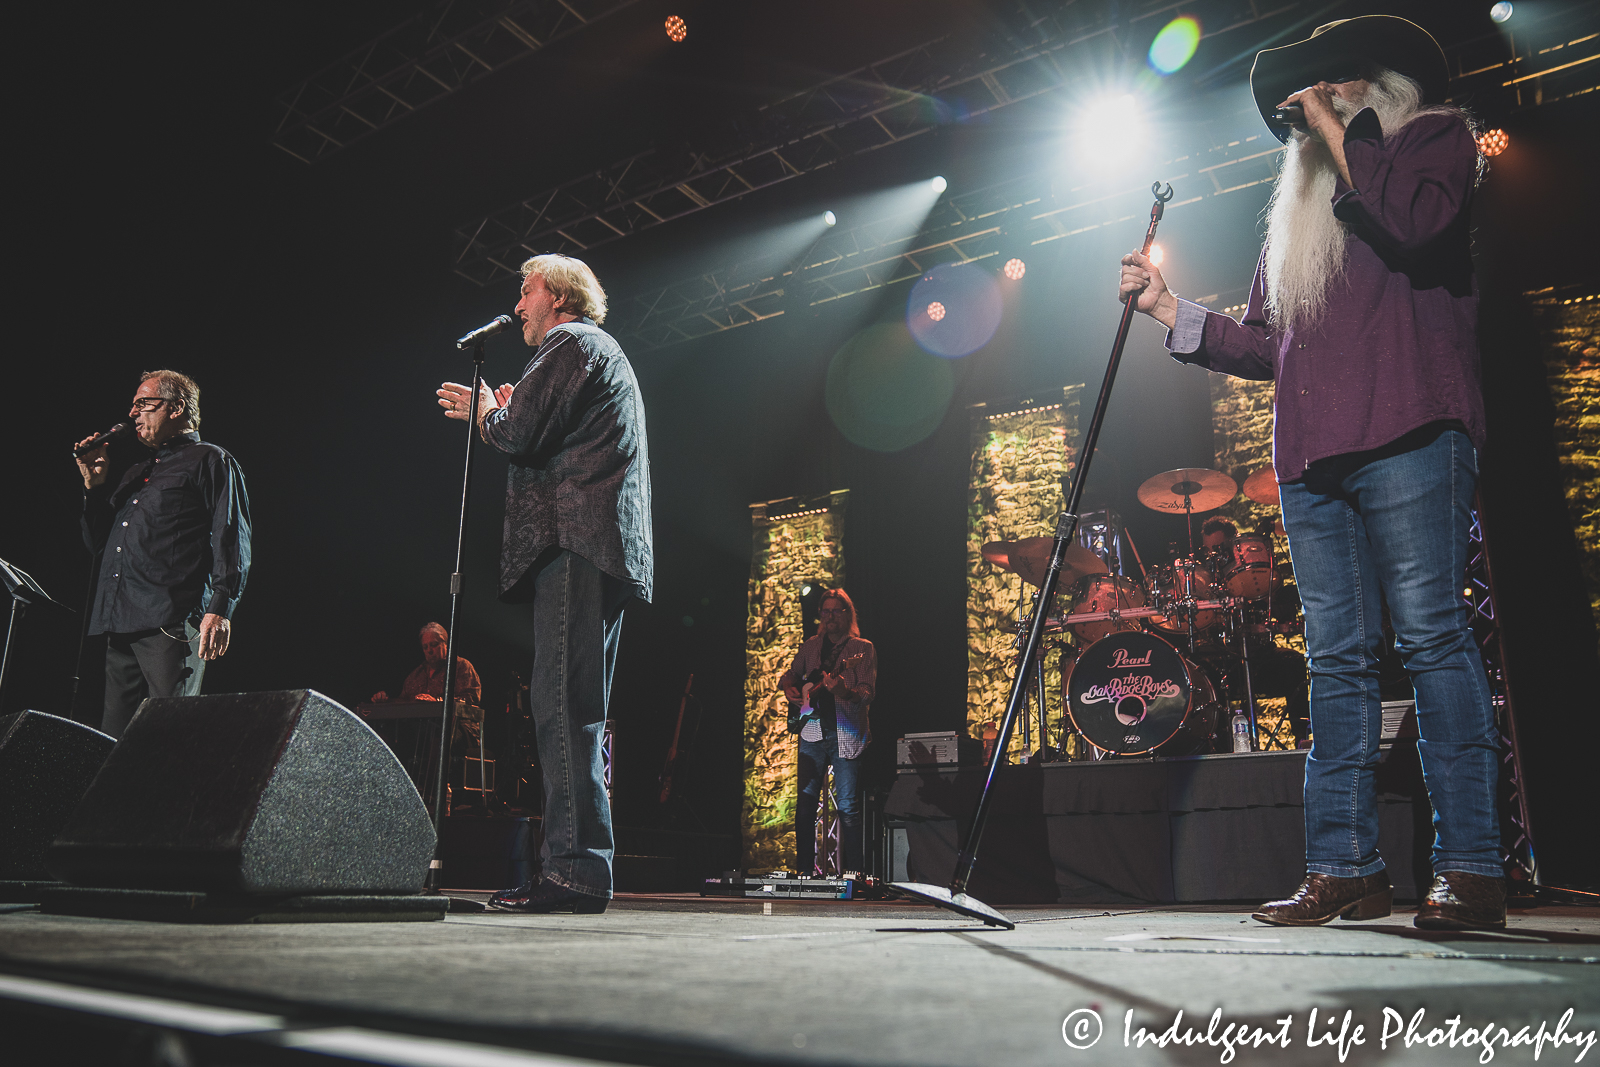 The Oak Ridge Boys members Duane Allen and William Lee Golden live in concert with Rudy Gatlin at Ameristar Casino in Kansas City, MO on July 15, 2022.